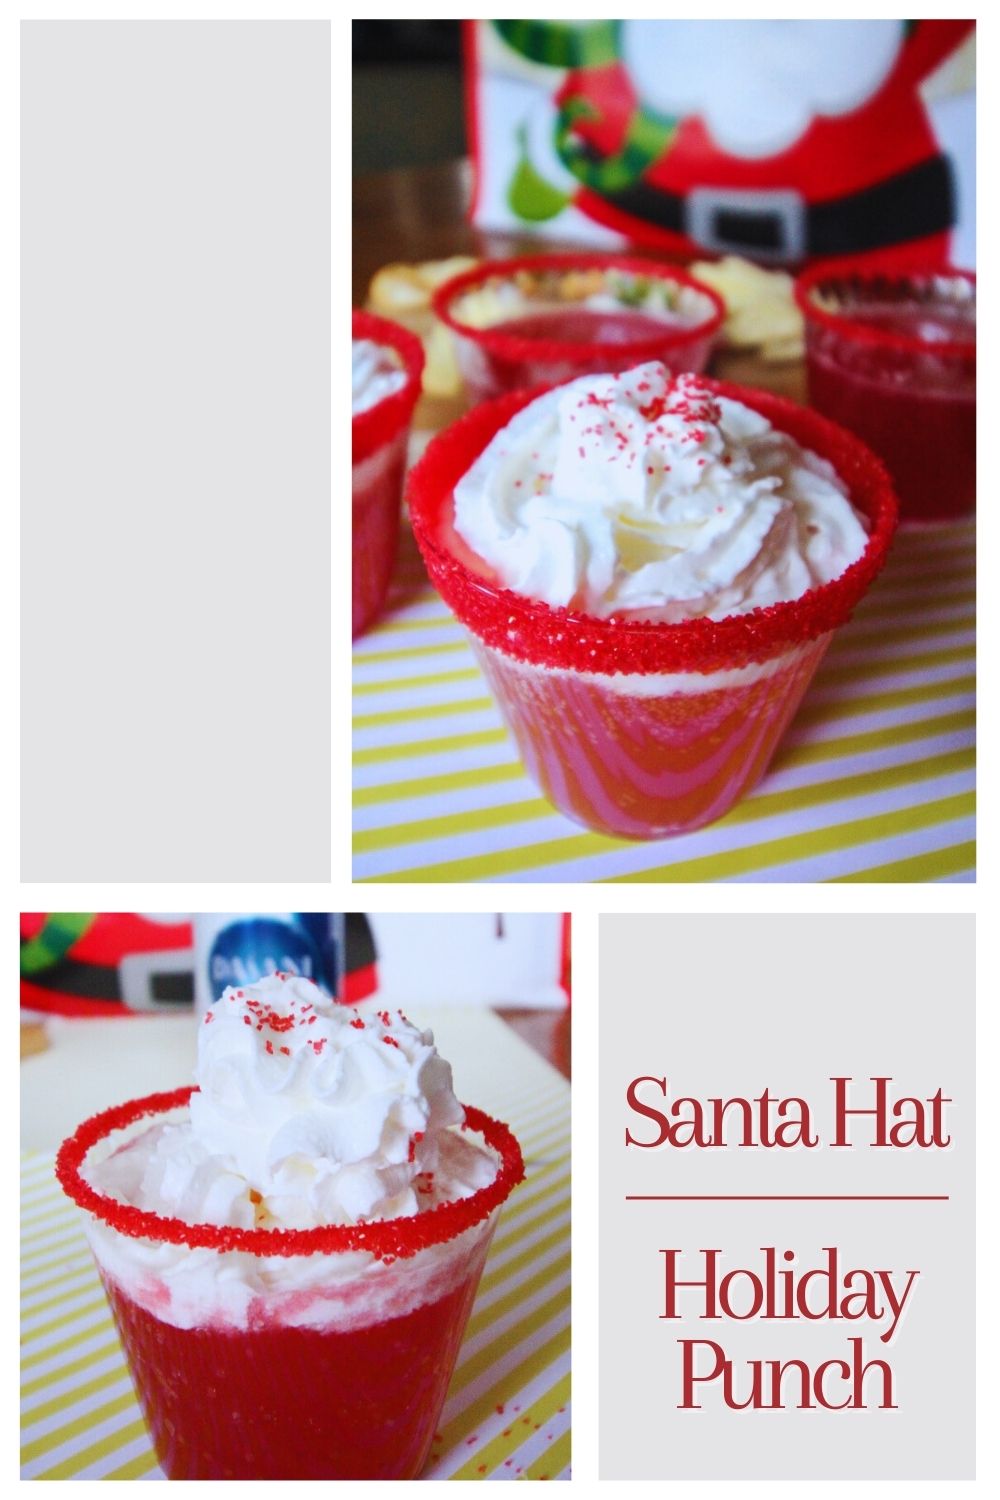 Pin For Pinterest of the Santa Hat Holiday Punch.